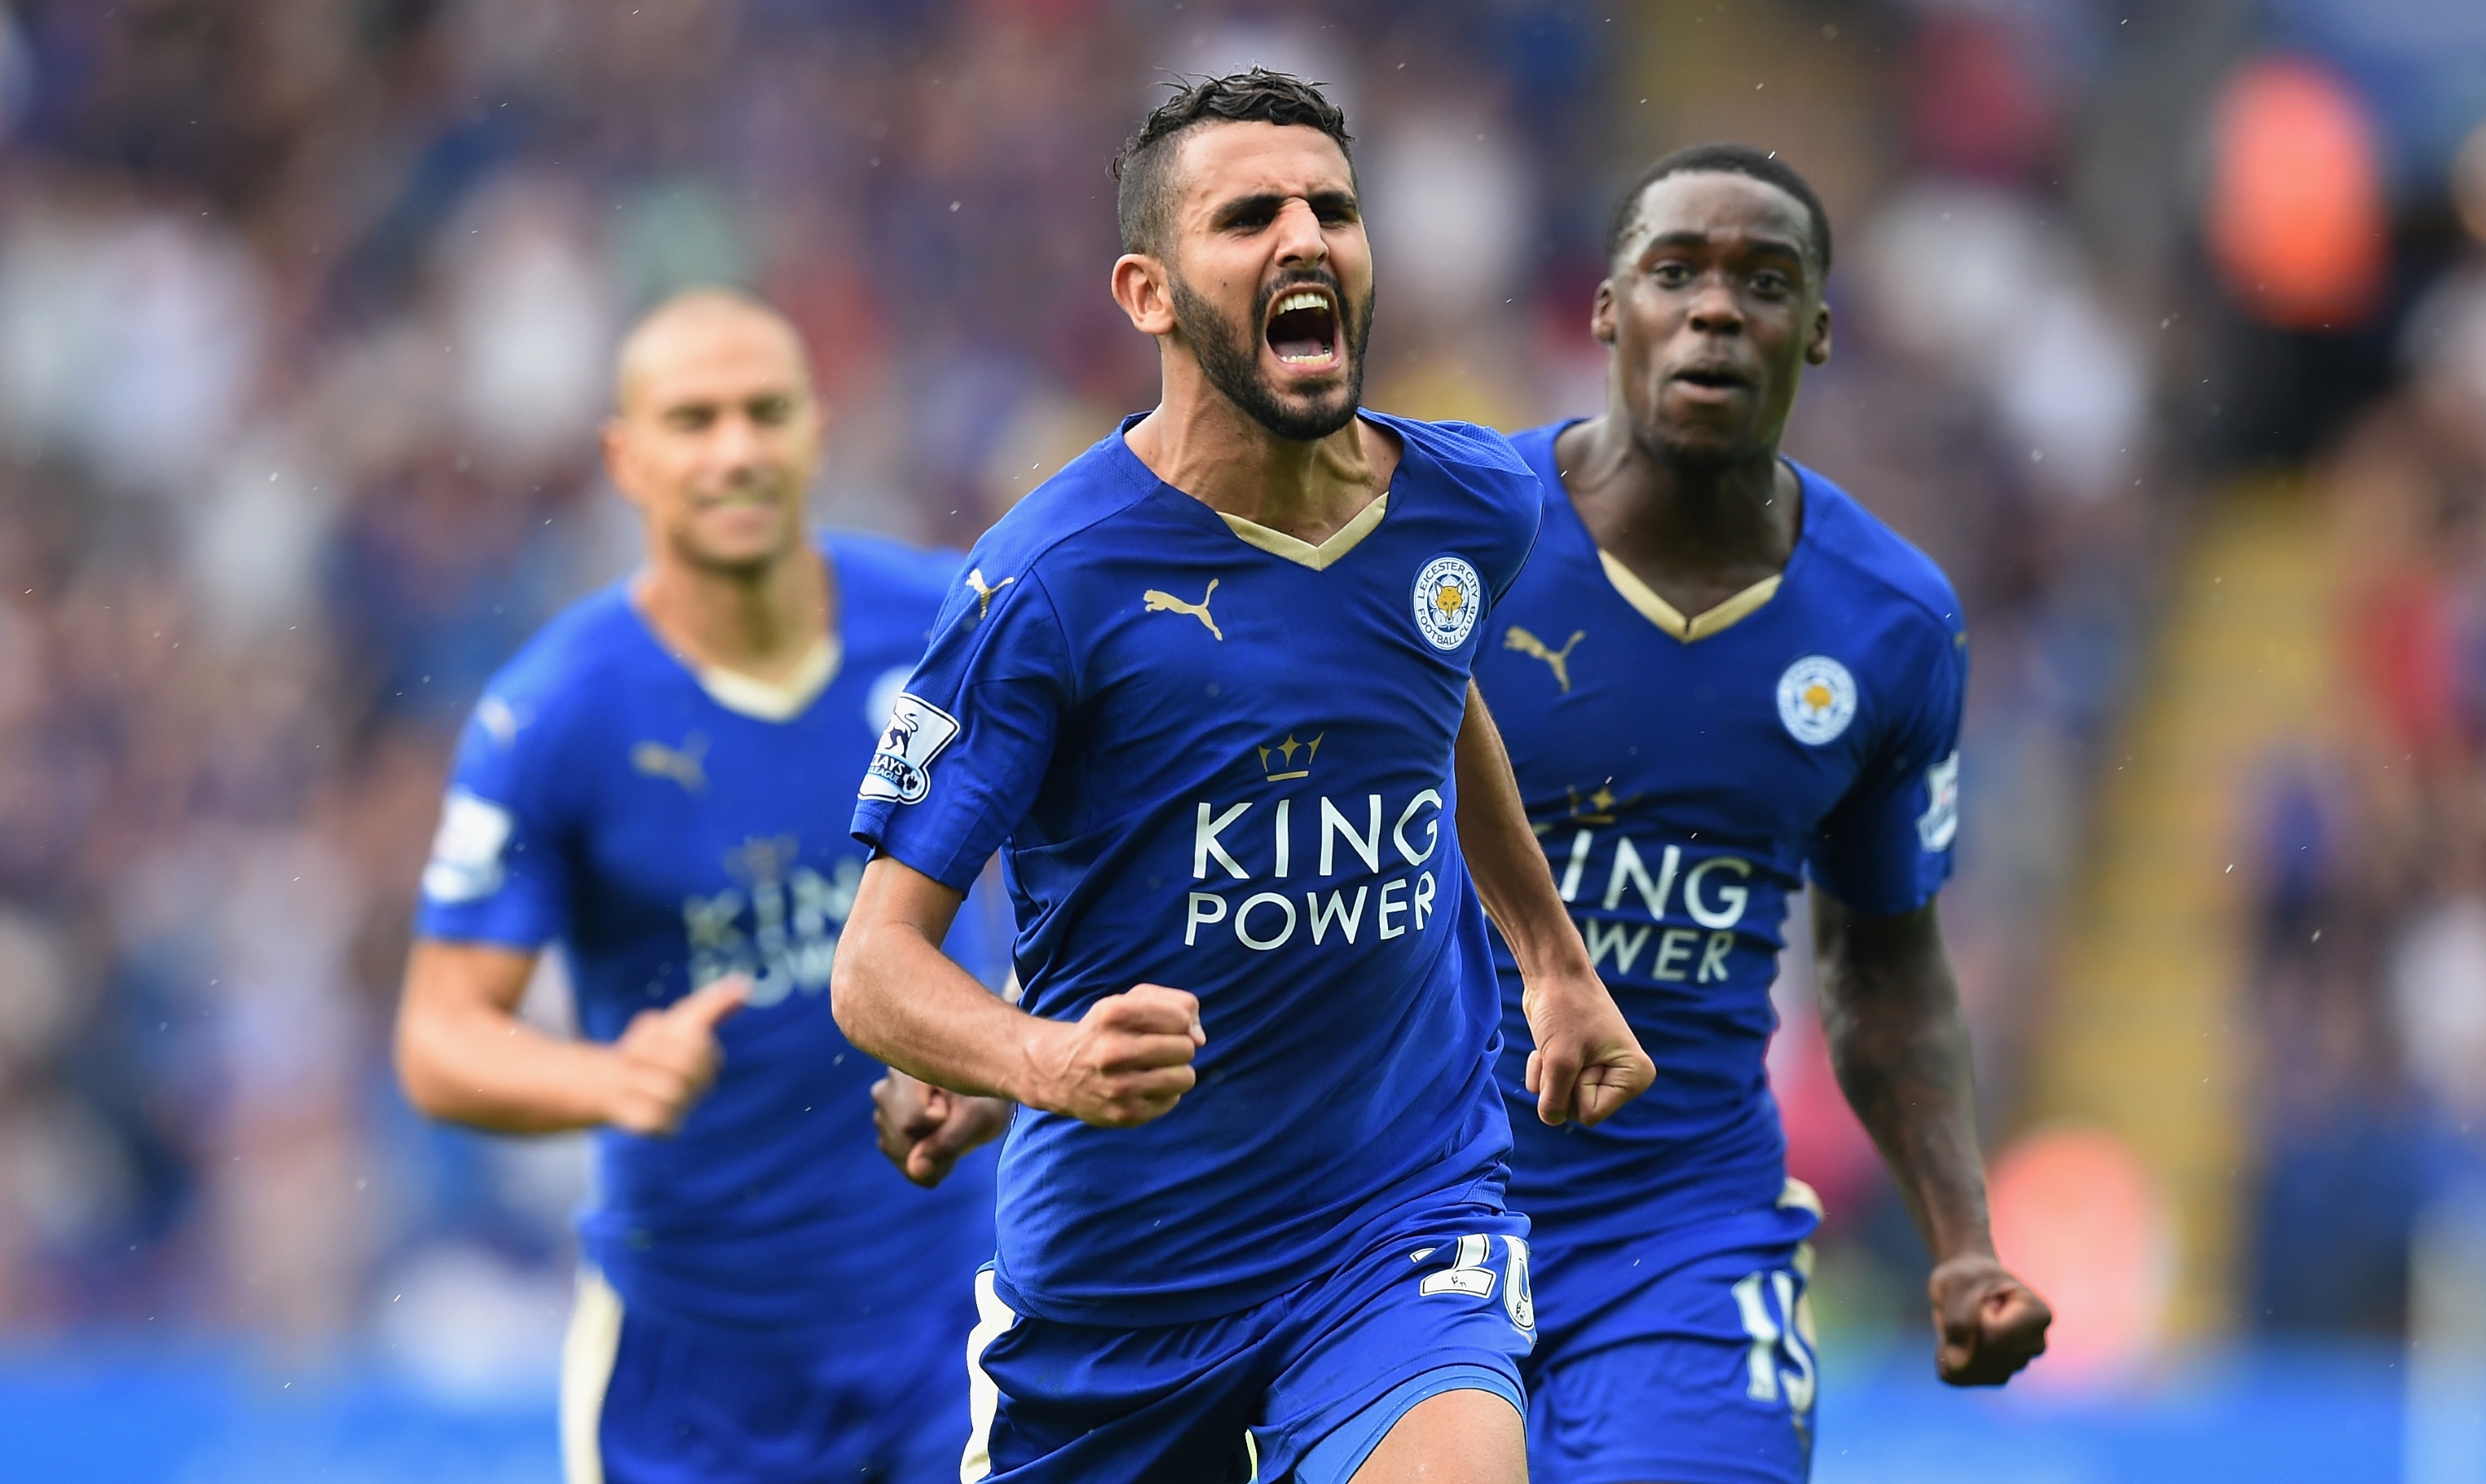 LEICESTER, ENGLAND - AUGUST 22: Riyad Mahrez of Leicester City celebrates scoring his team's first goal during the Barclays Premier League match between Leicester City and Tottenham Hotspur at The King Power Stadium on August 22, 2015 in Leicester, England. (Photo by Michael Regan/Getty Images)